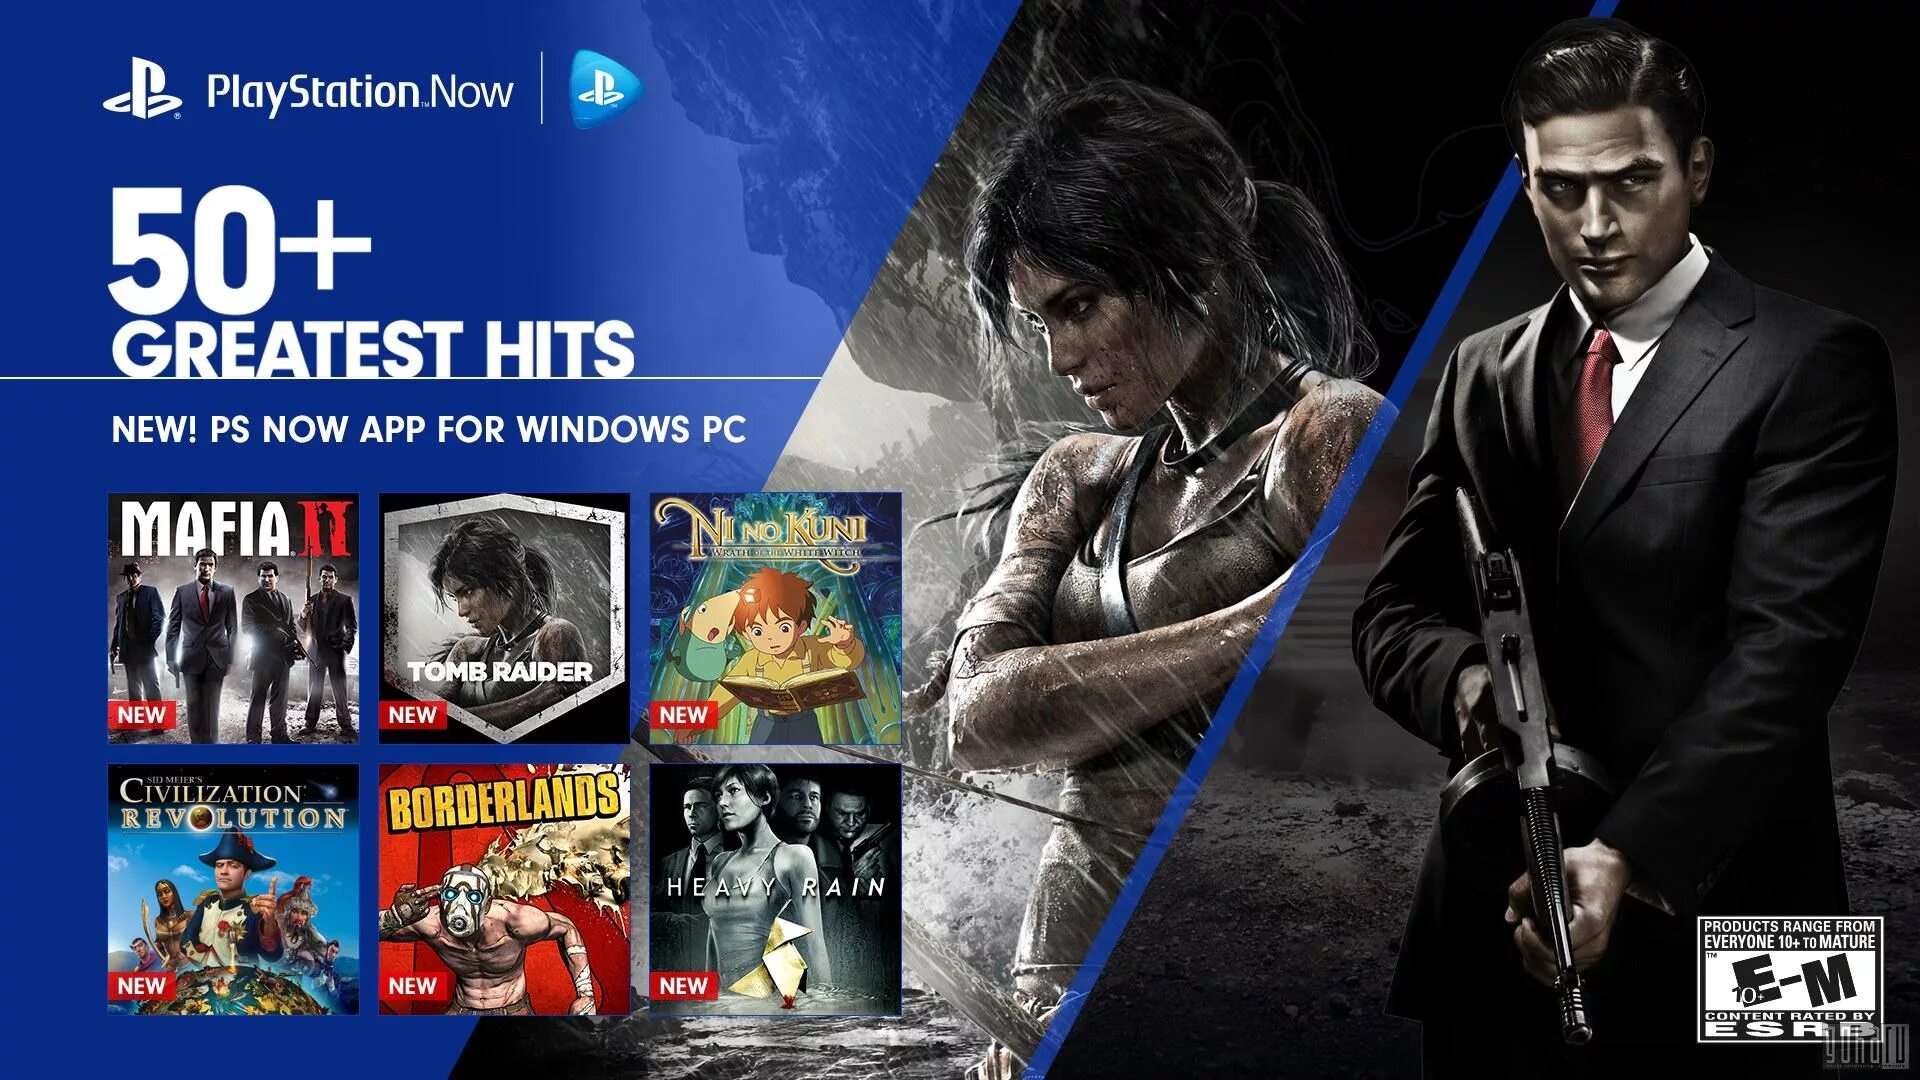 PS Now. PLAYSTATION игры. PS Now игры. Постер PLAYSTATION.